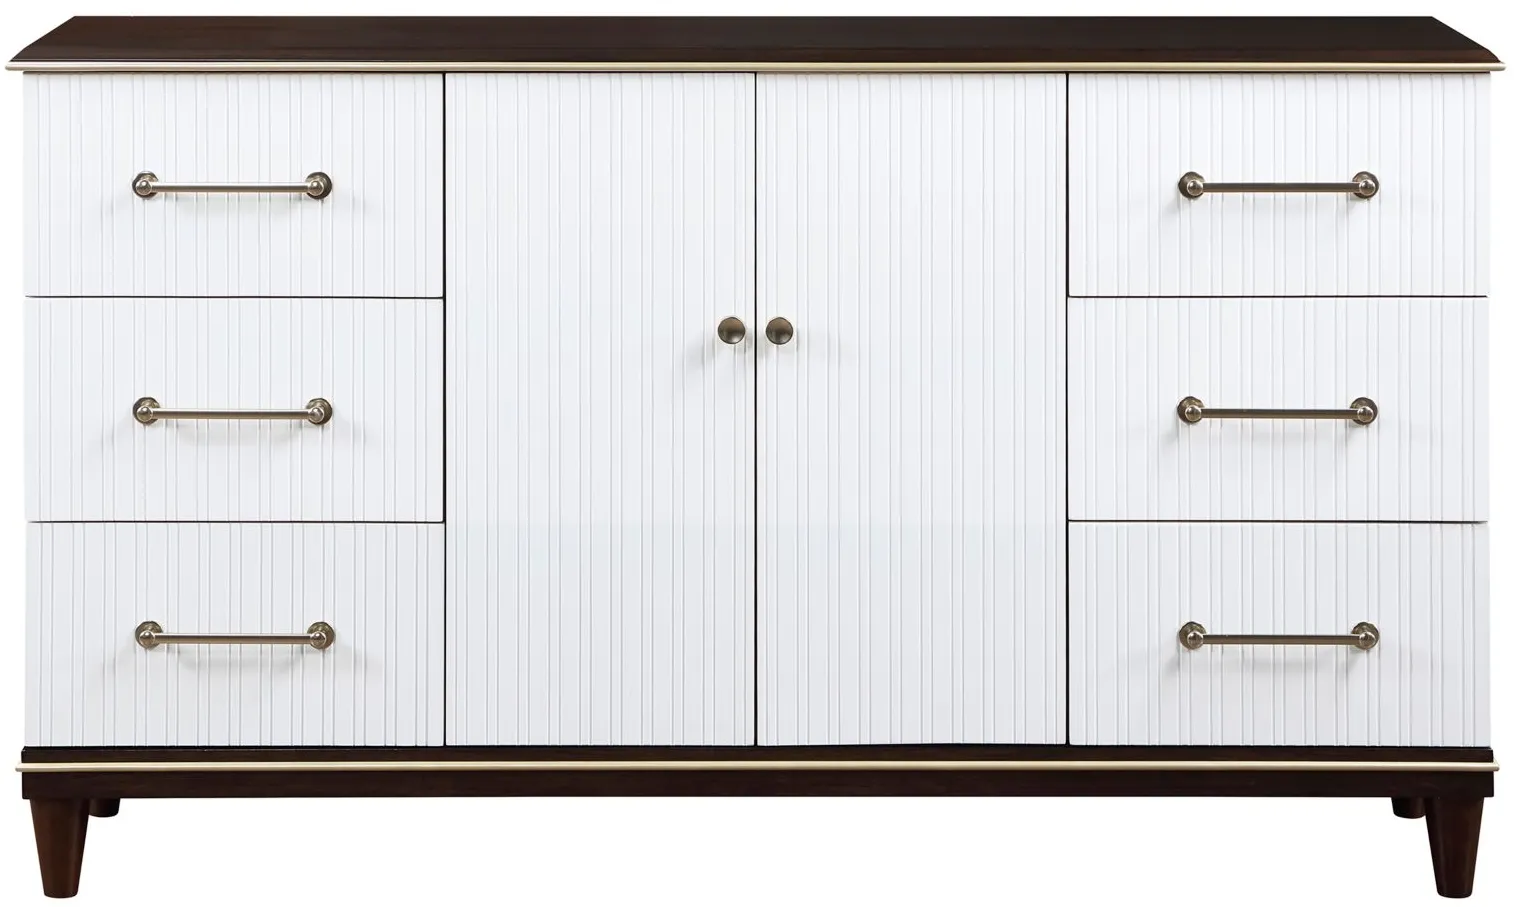 Bellamy Dresser in 2-Tone Finish with Gold Trim (White and Cherry) by Homelegance